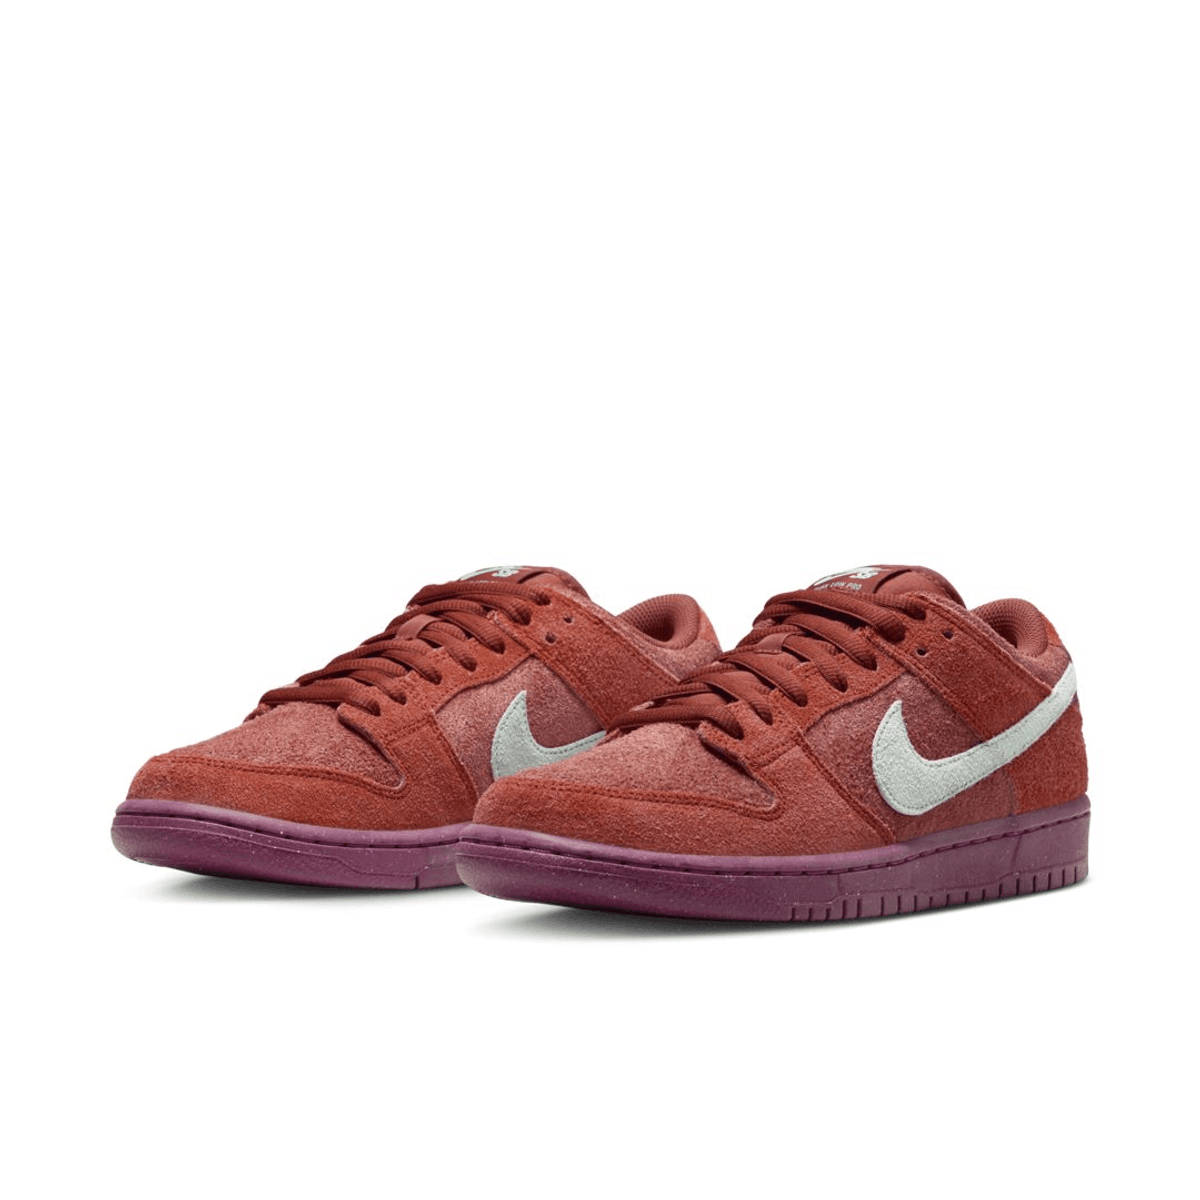 The Nike SB Dunk Low Mystic Red Teases Release With New Images